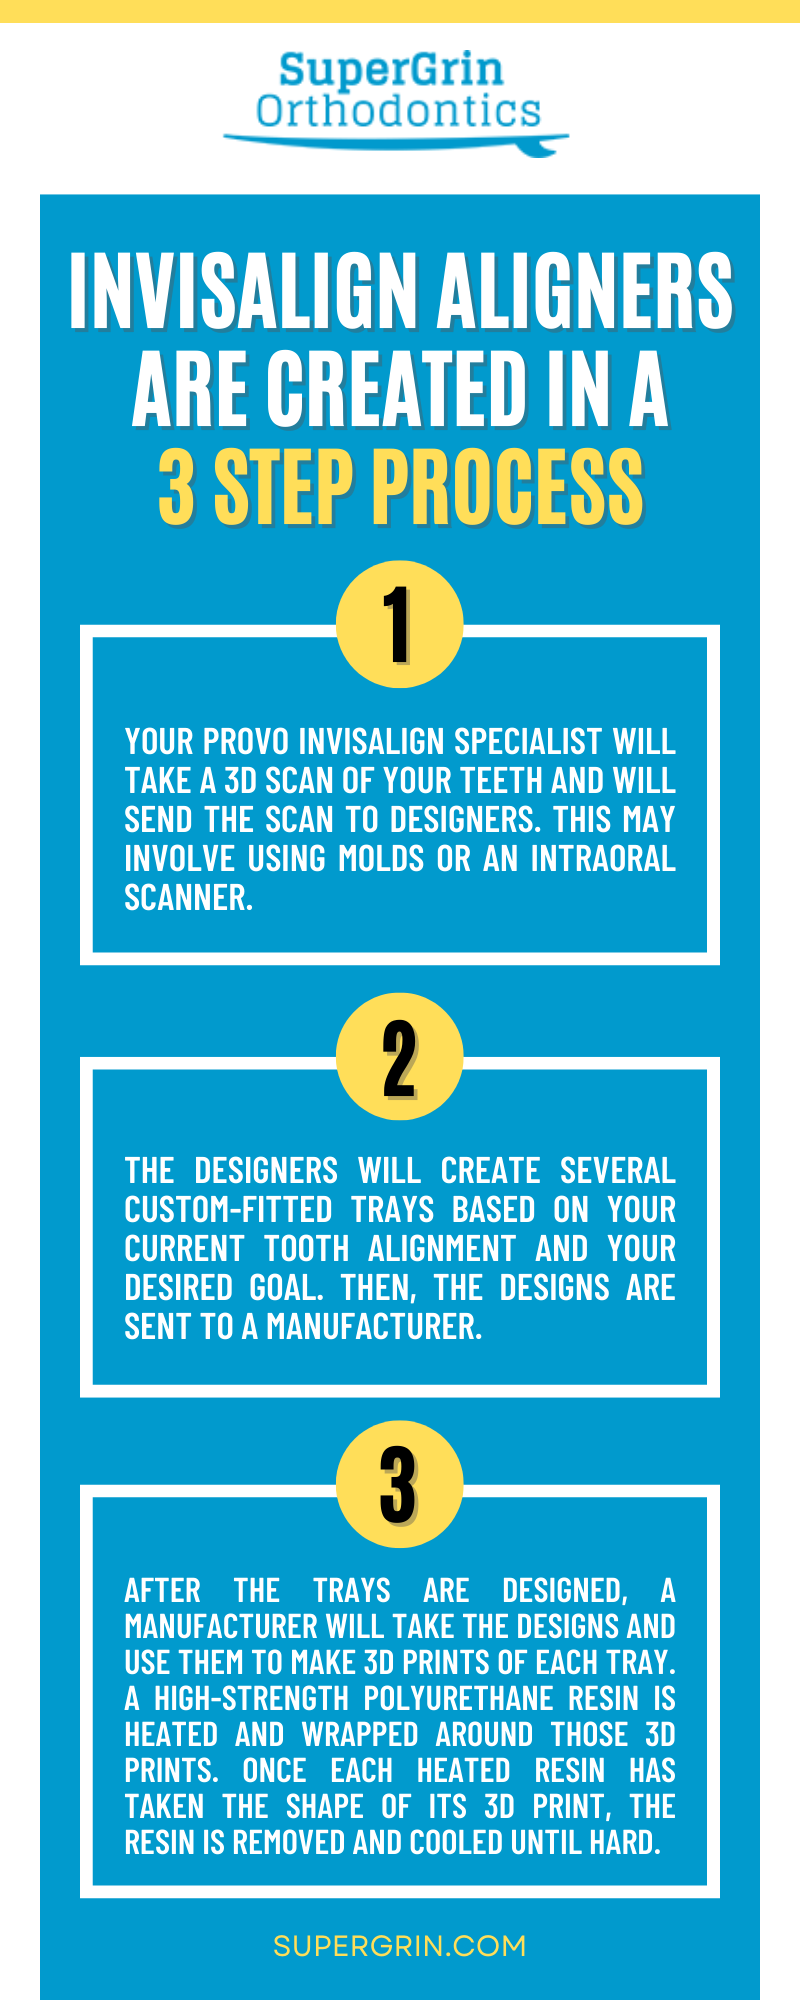 Invisalign aligners are created in a three step process